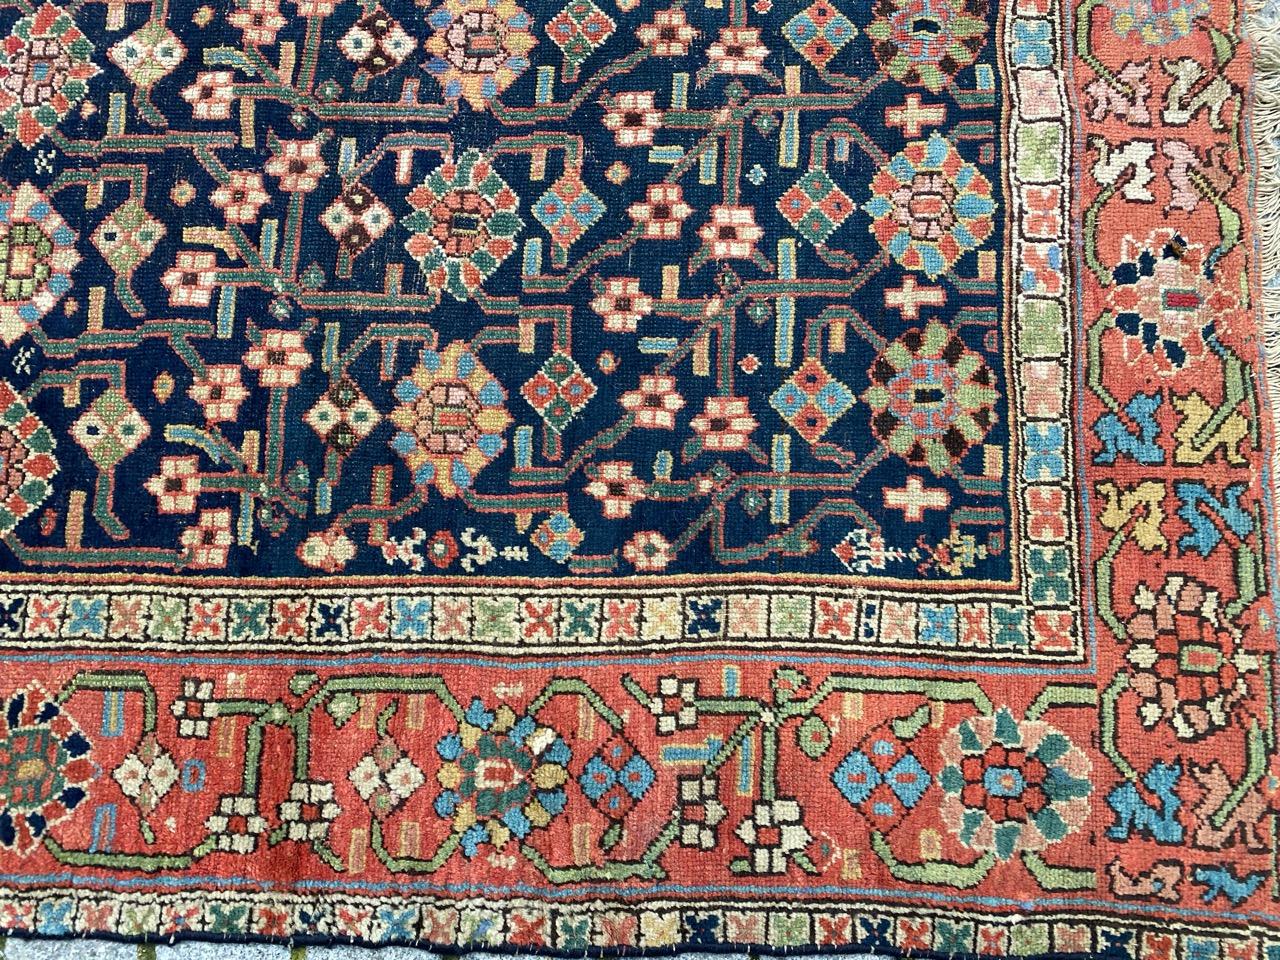 Wonderful antique rug with beautiful decorative design and nice natural colors, entirely hand knotted with wool velvet on wool foundation.

✨✨✨
